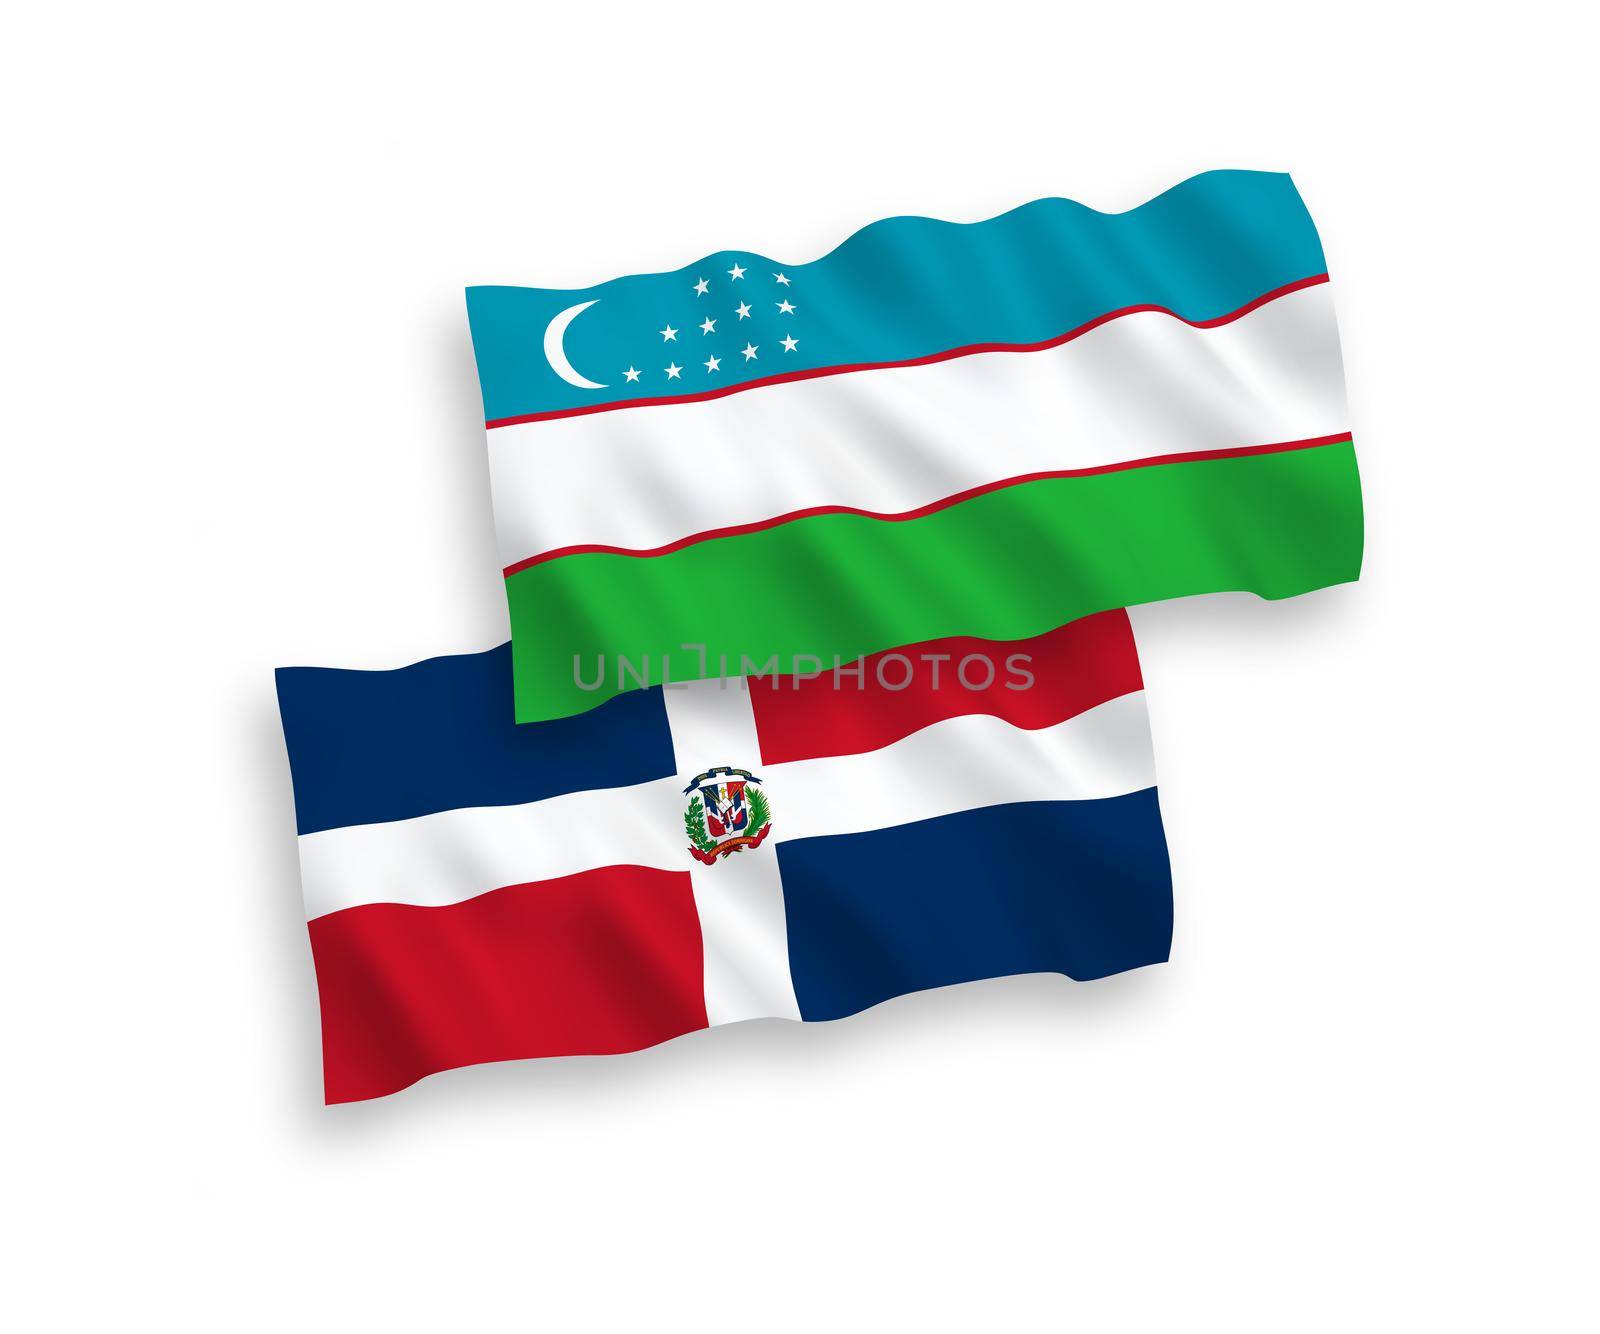 Flags of Dominican Republic and Uzbekistan on a white background by epic33